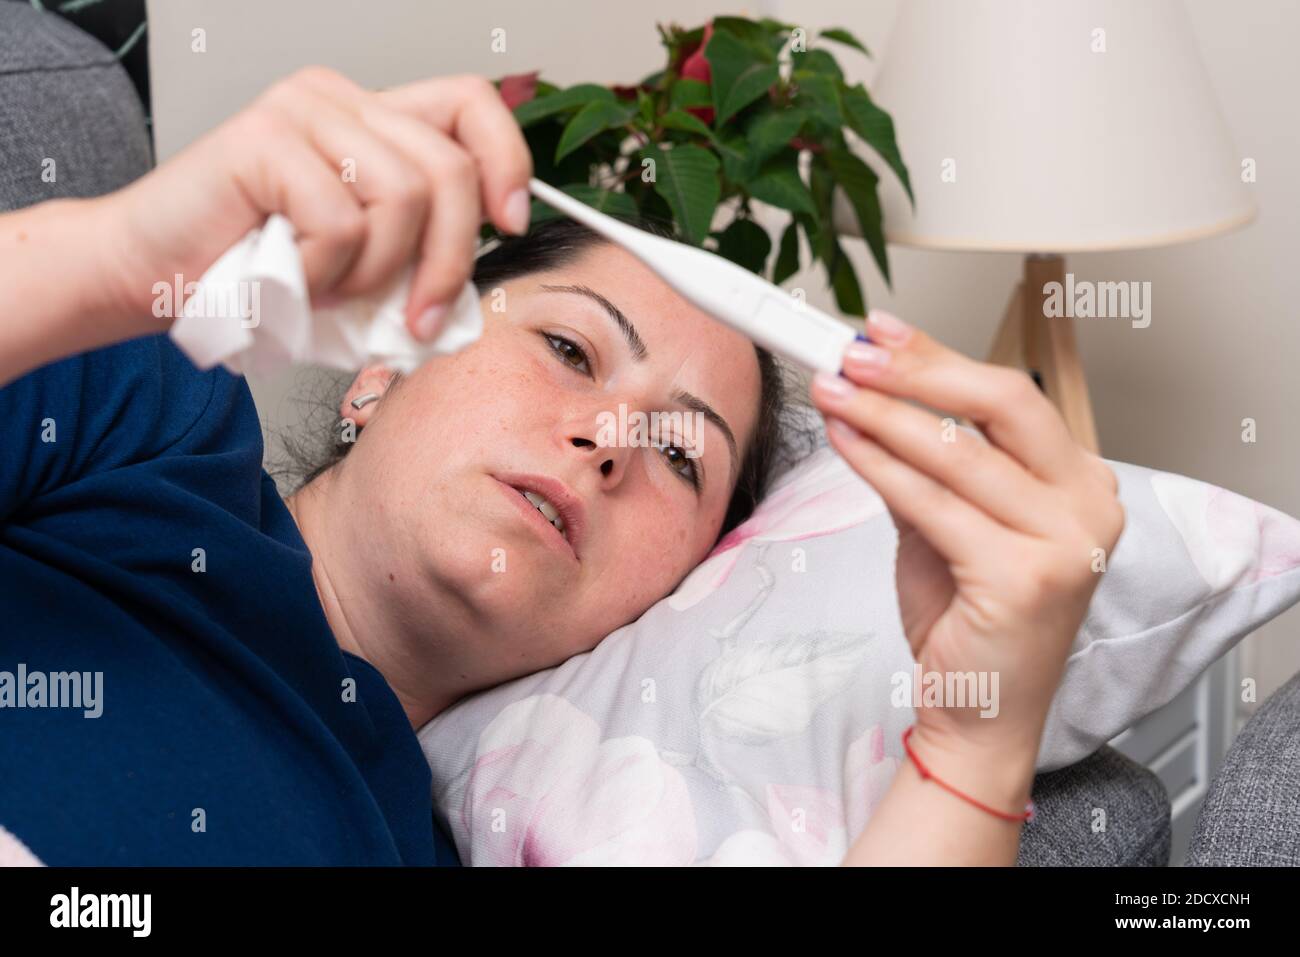 Sick female model with influenza cold covid19 symptoms looking at thermometer checking body temperature high fever feeling unwell Stock Photo